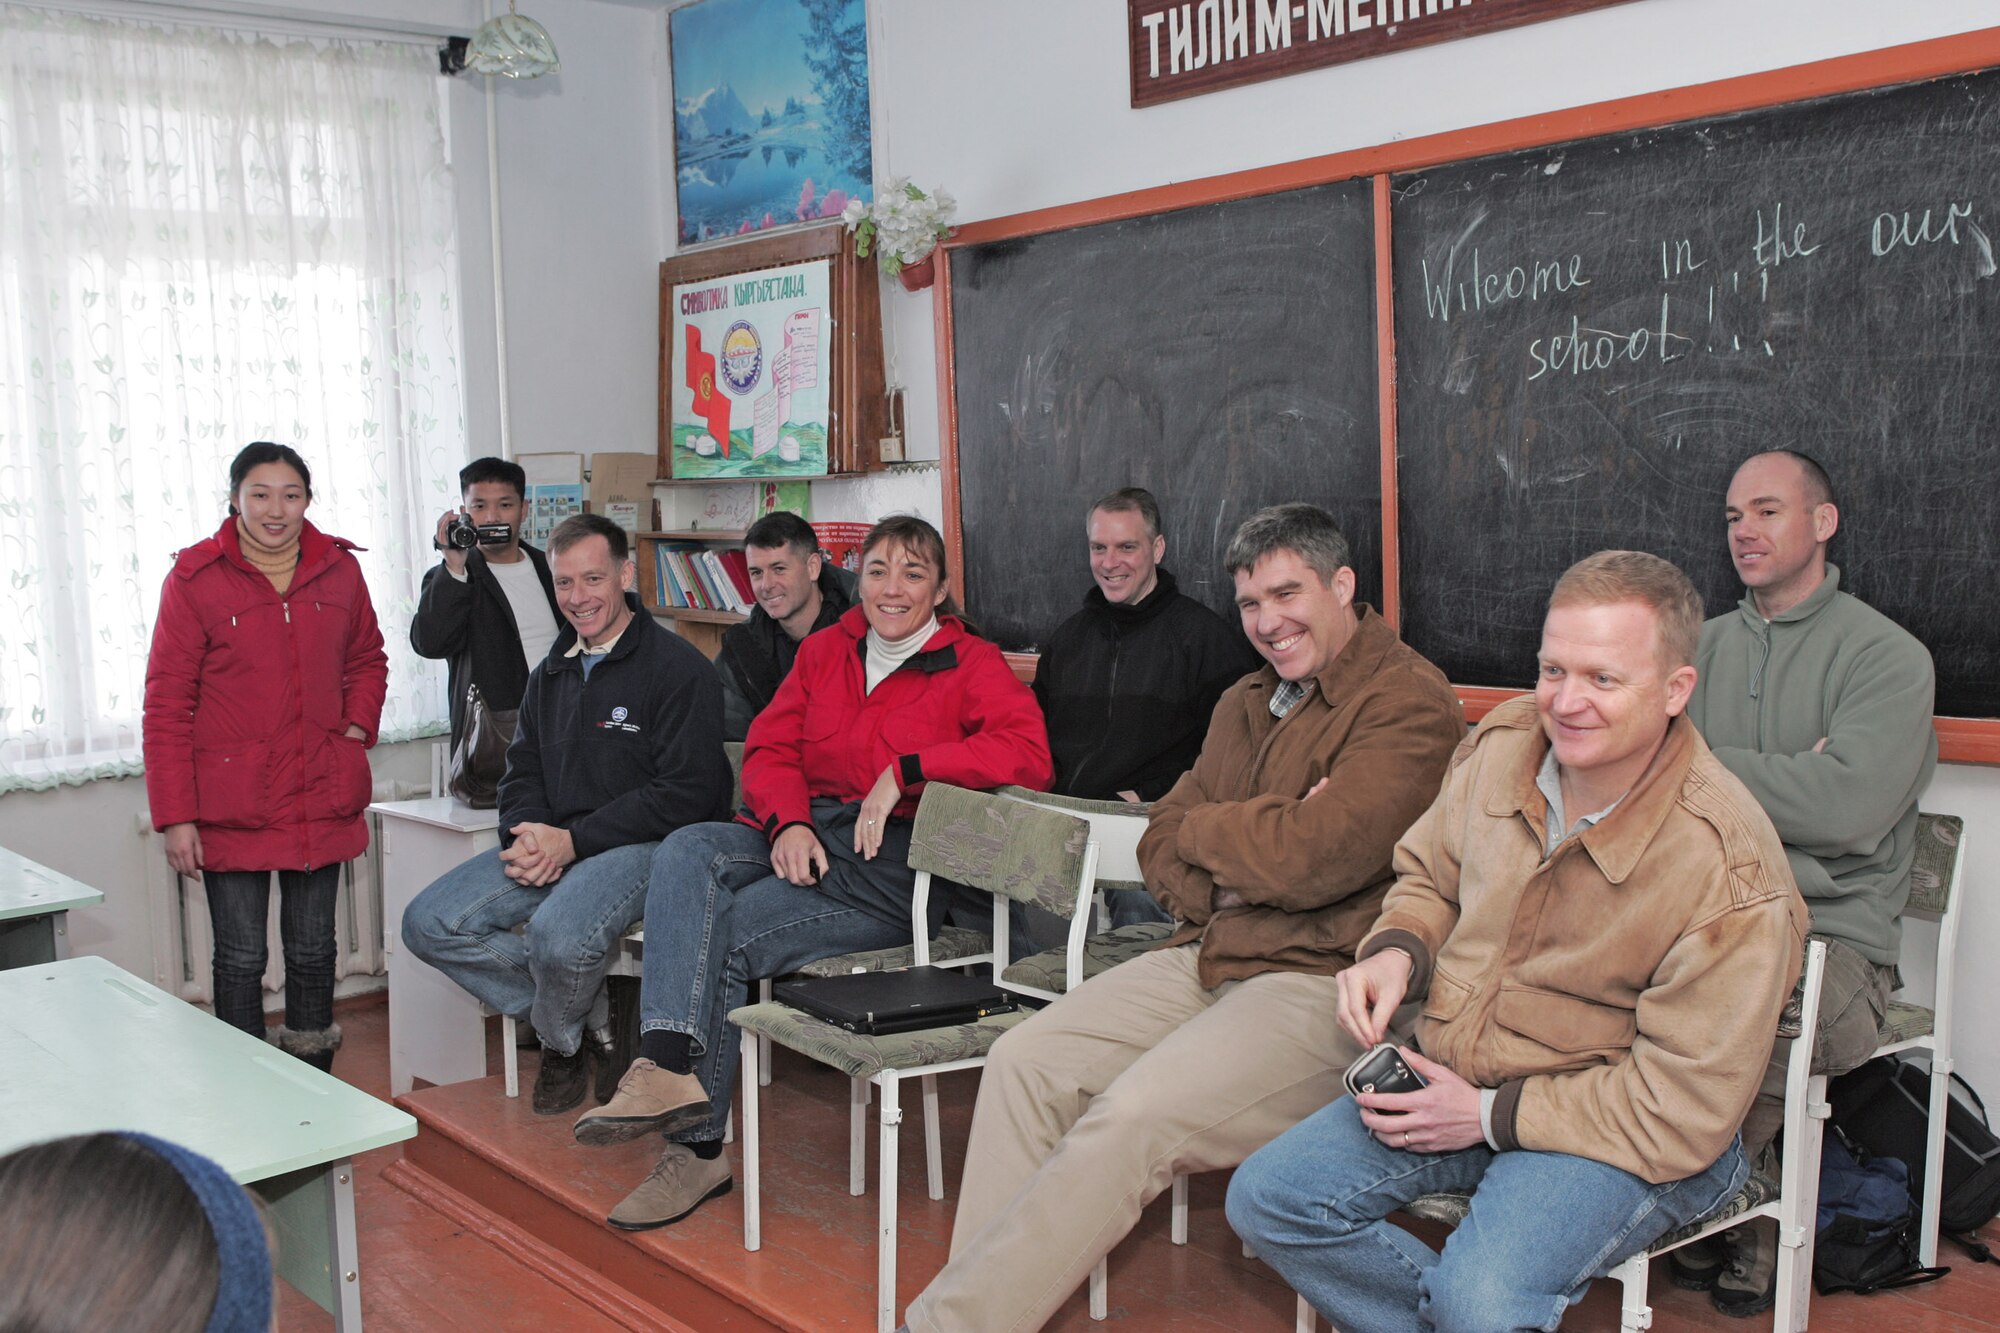 Astronauts from the Space Shuttle Endeavour STS-126 mission visit a Kyrgyzstan village school Jan. 29 near Manas Air Base, Kyrgyzstan. The six crewmembers of the space shuttle spoke of the journey, which launched from Kennedy Space Center in Florida Nov. 14 and returned Nov. 30, 2008. (U.S. Air Force photo/Tech. Sgt. David Jones) 
